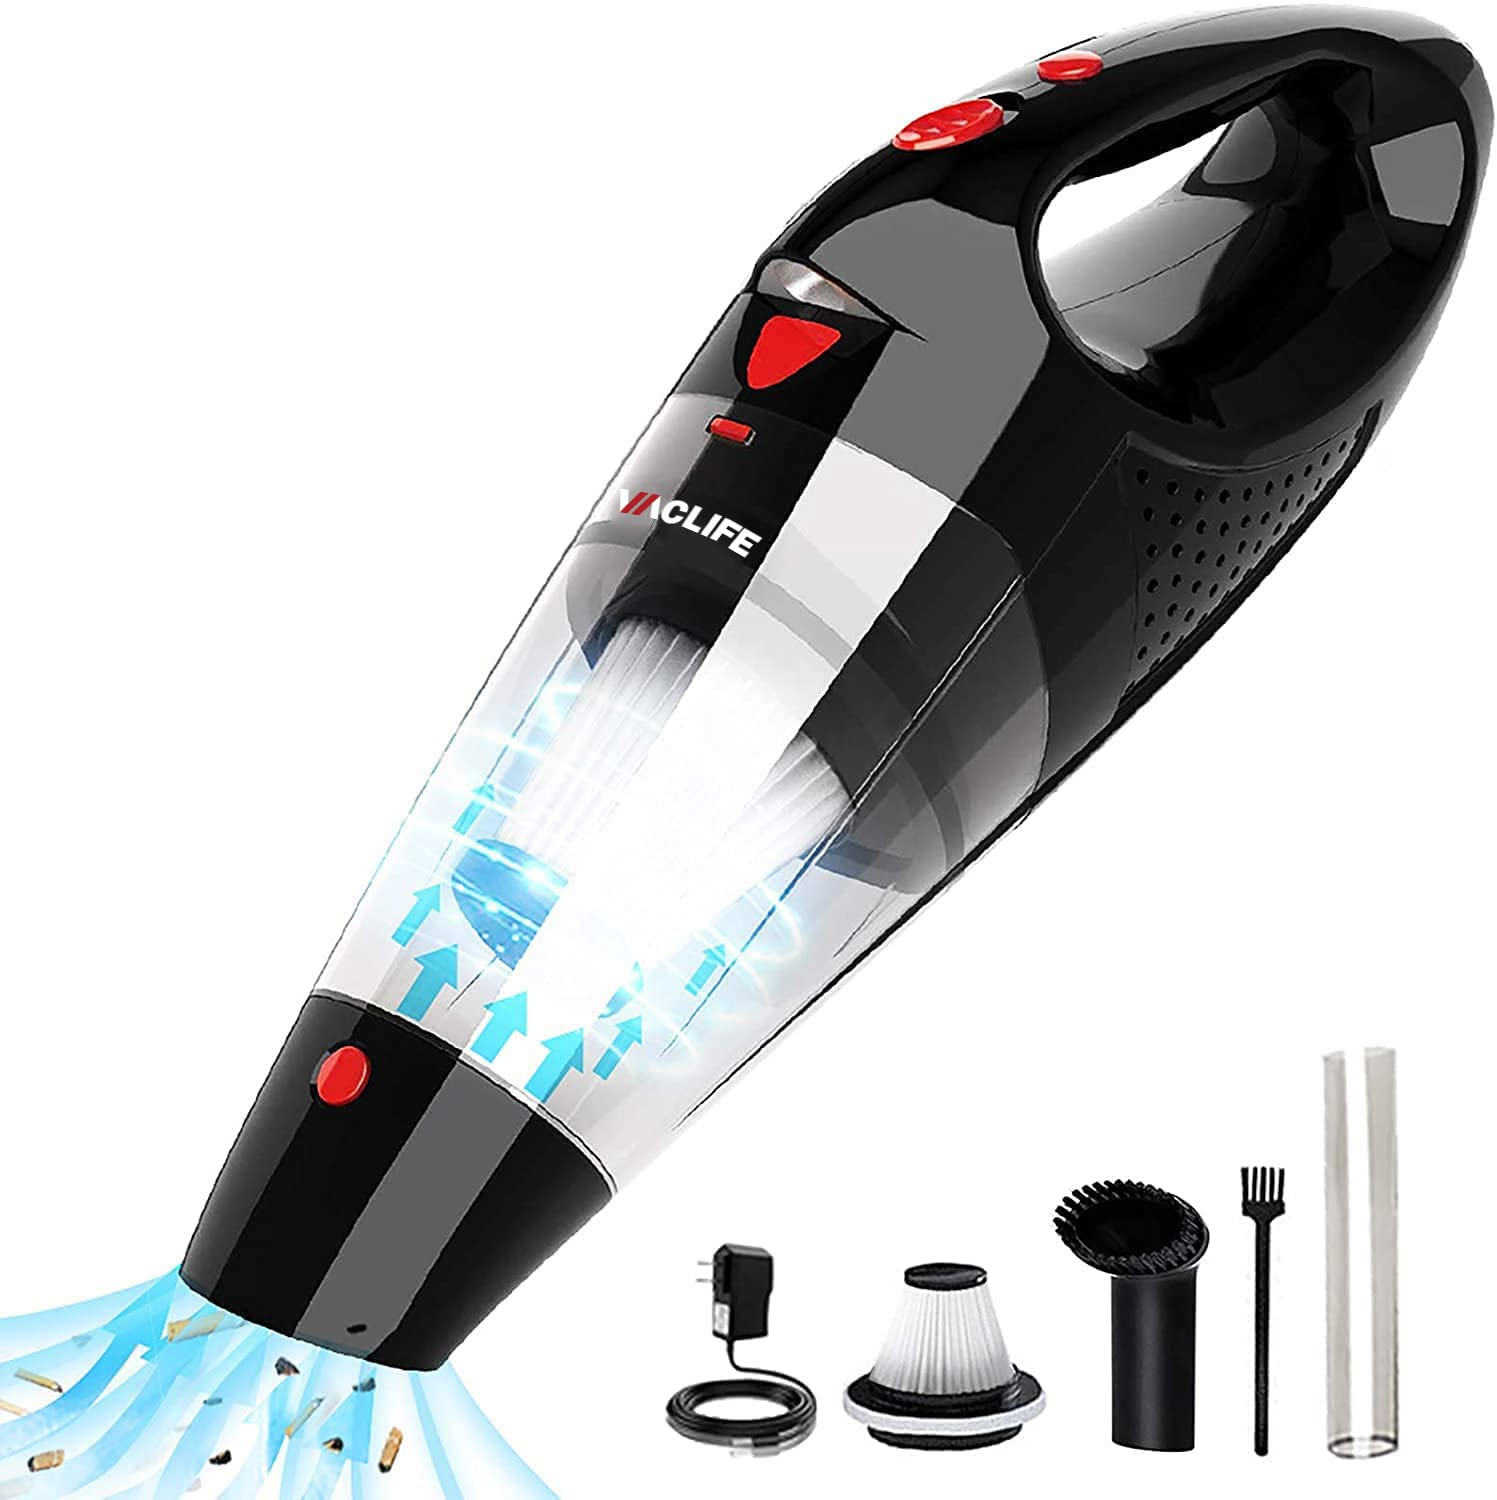 VacLife Handheld Vacuum, Car Vacuum Cleaner Cordless, Mini Portable Rechargeable Wireless Vacuum Cleaner with 2 Filters, Red (VL188-N) - ASIN: B08KDHL66B